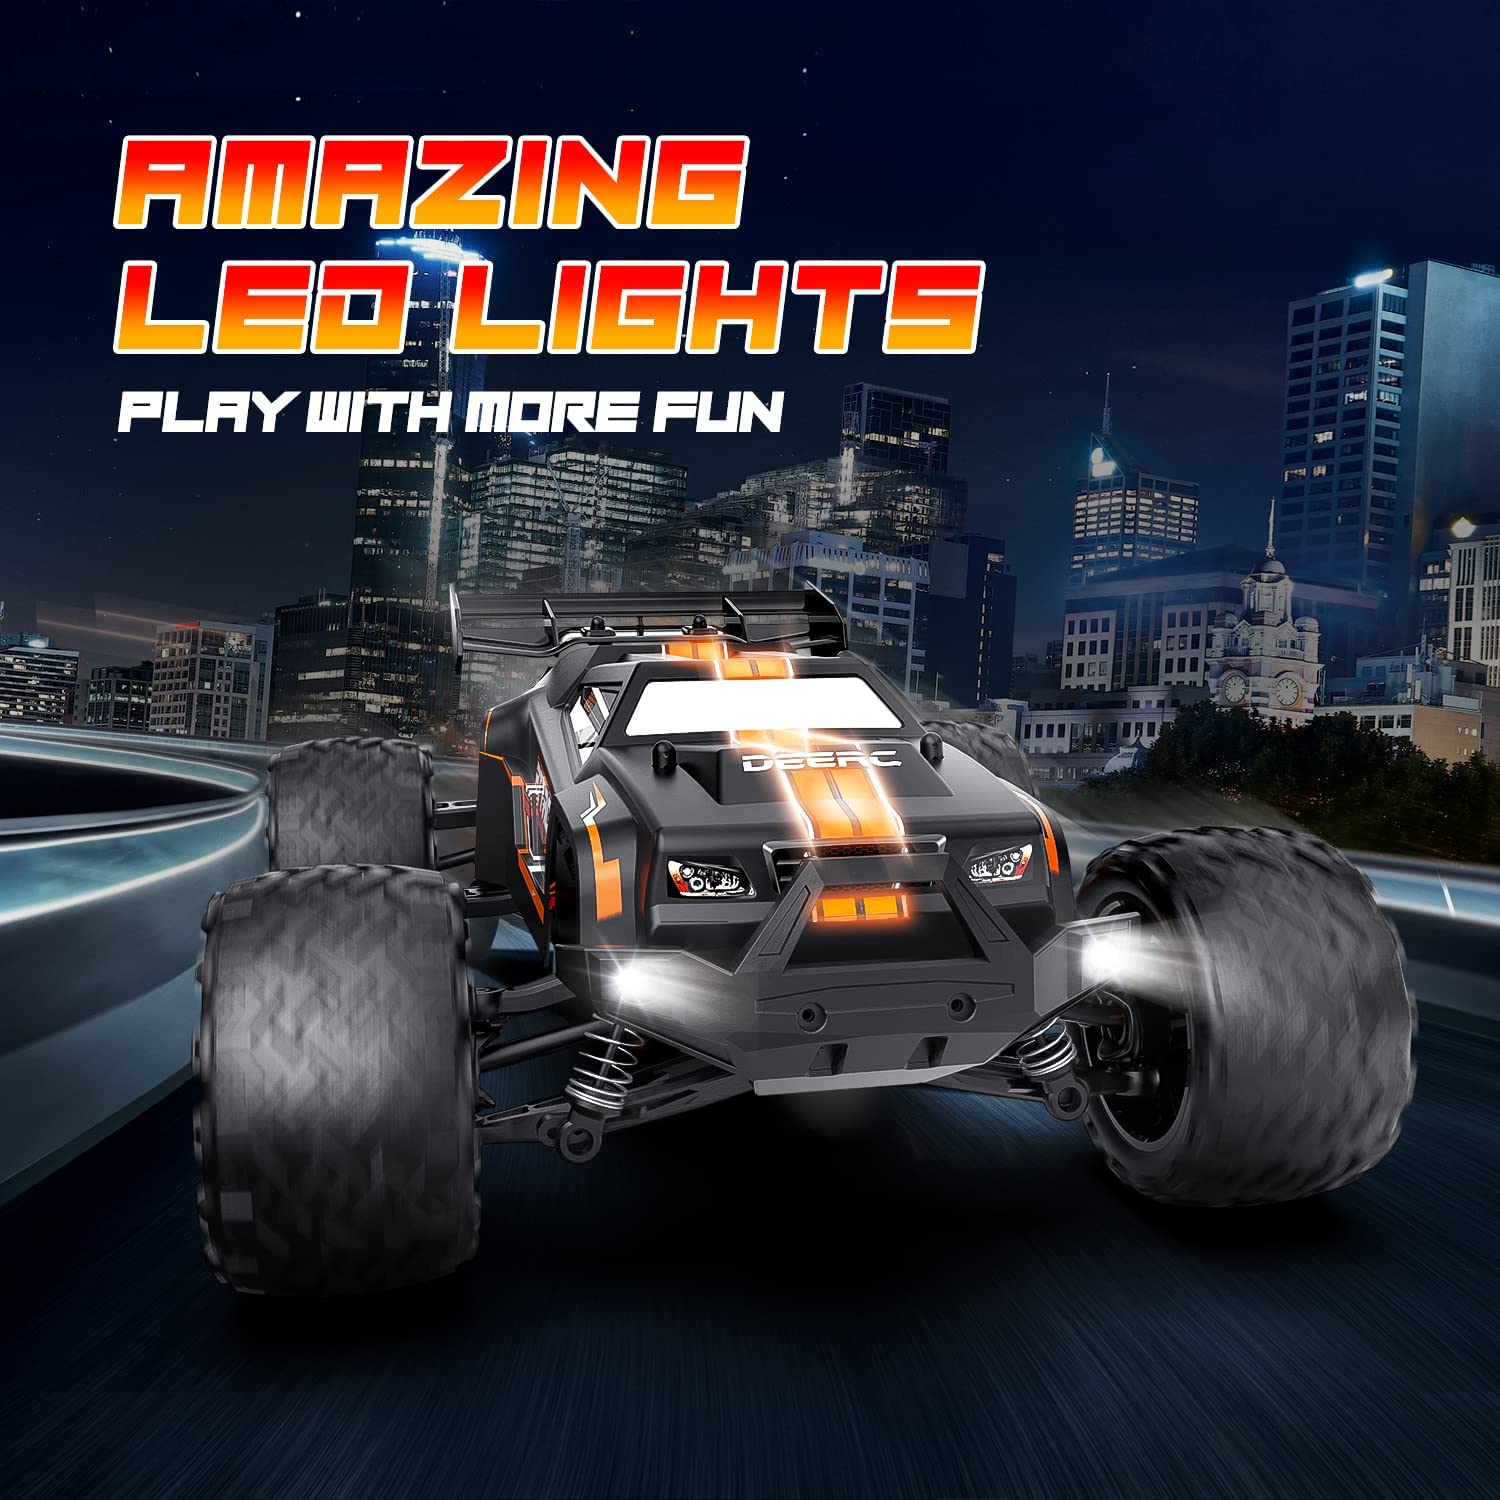 DEERC 9000E 1:14 Scale Remote Control Car with LED Shell Light, Upgraded 40 KM/H High Speed RC Truck for Adults Boys, 4WD All Terrain Off Road Monster Truck with 2 Rechargeable Battery for 40+Min Play